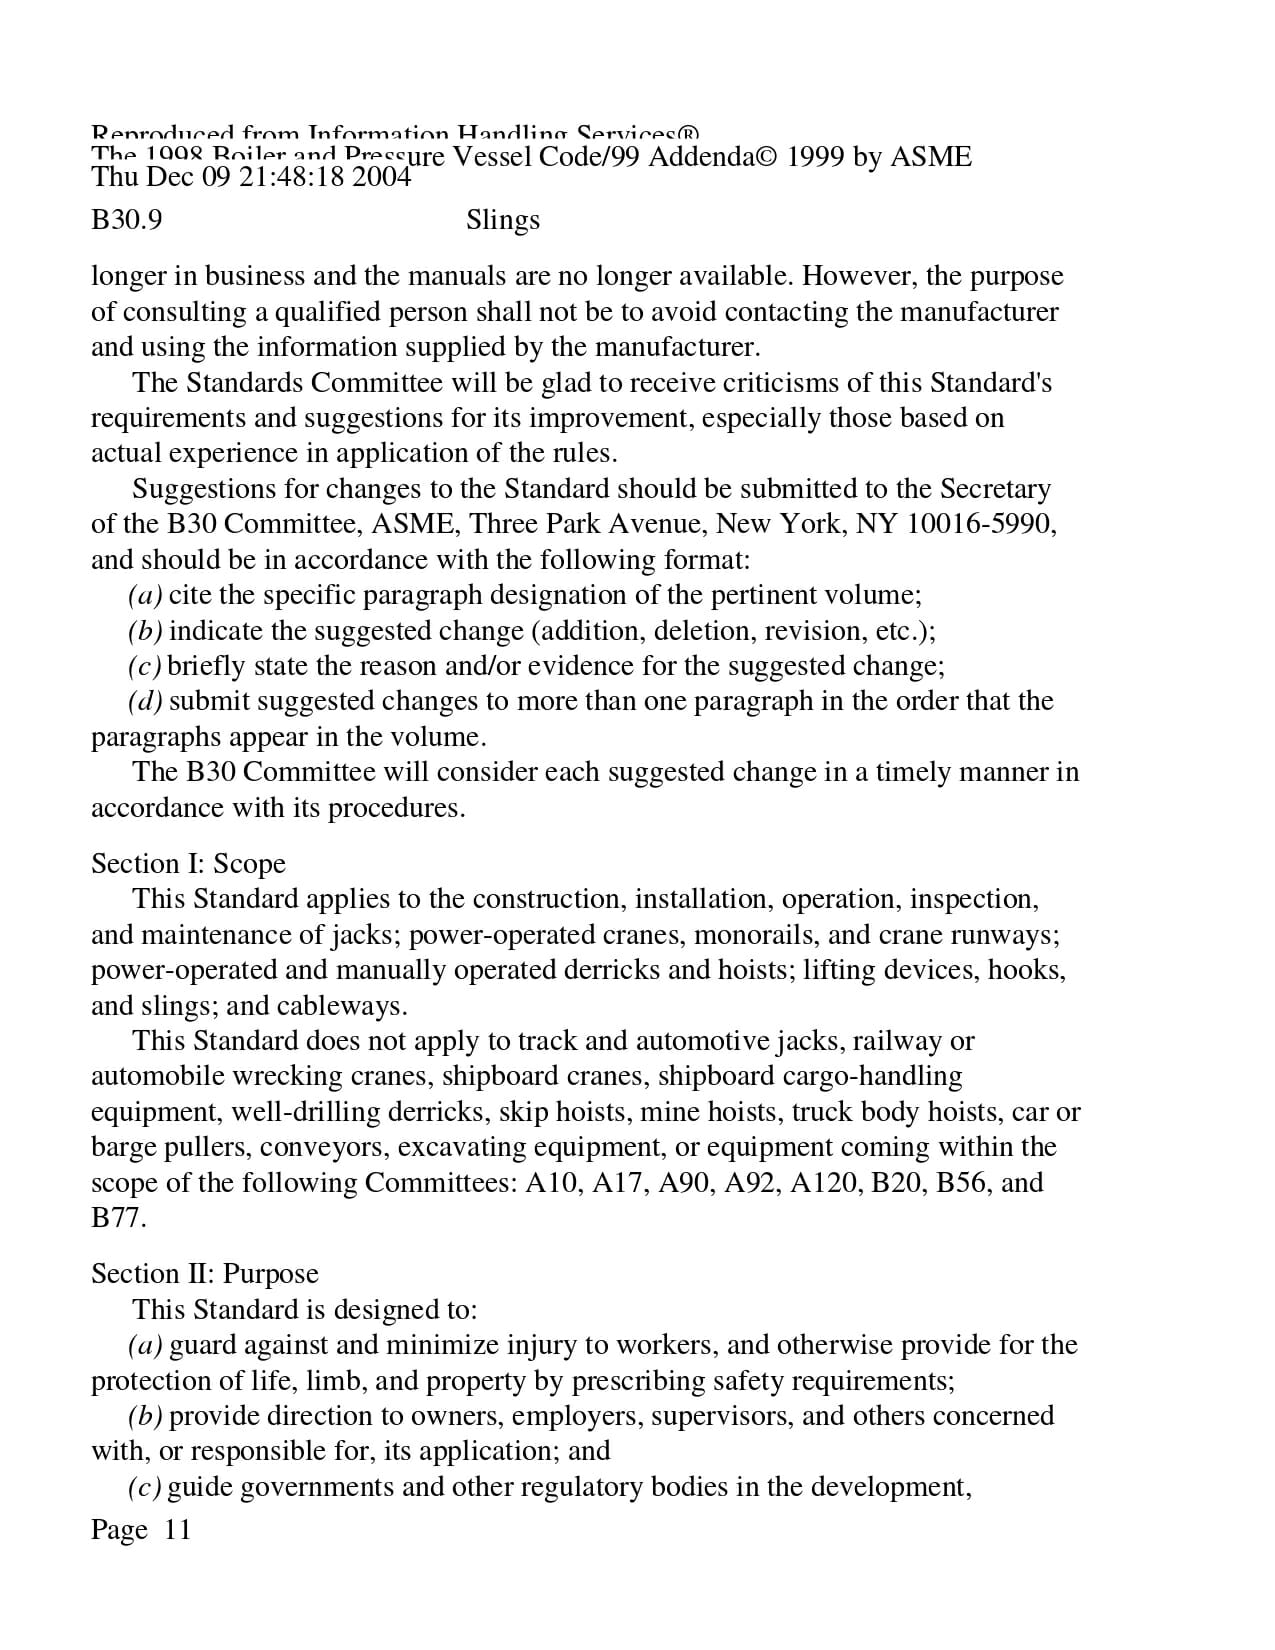 vdocument.in_asme-b309_page-0011